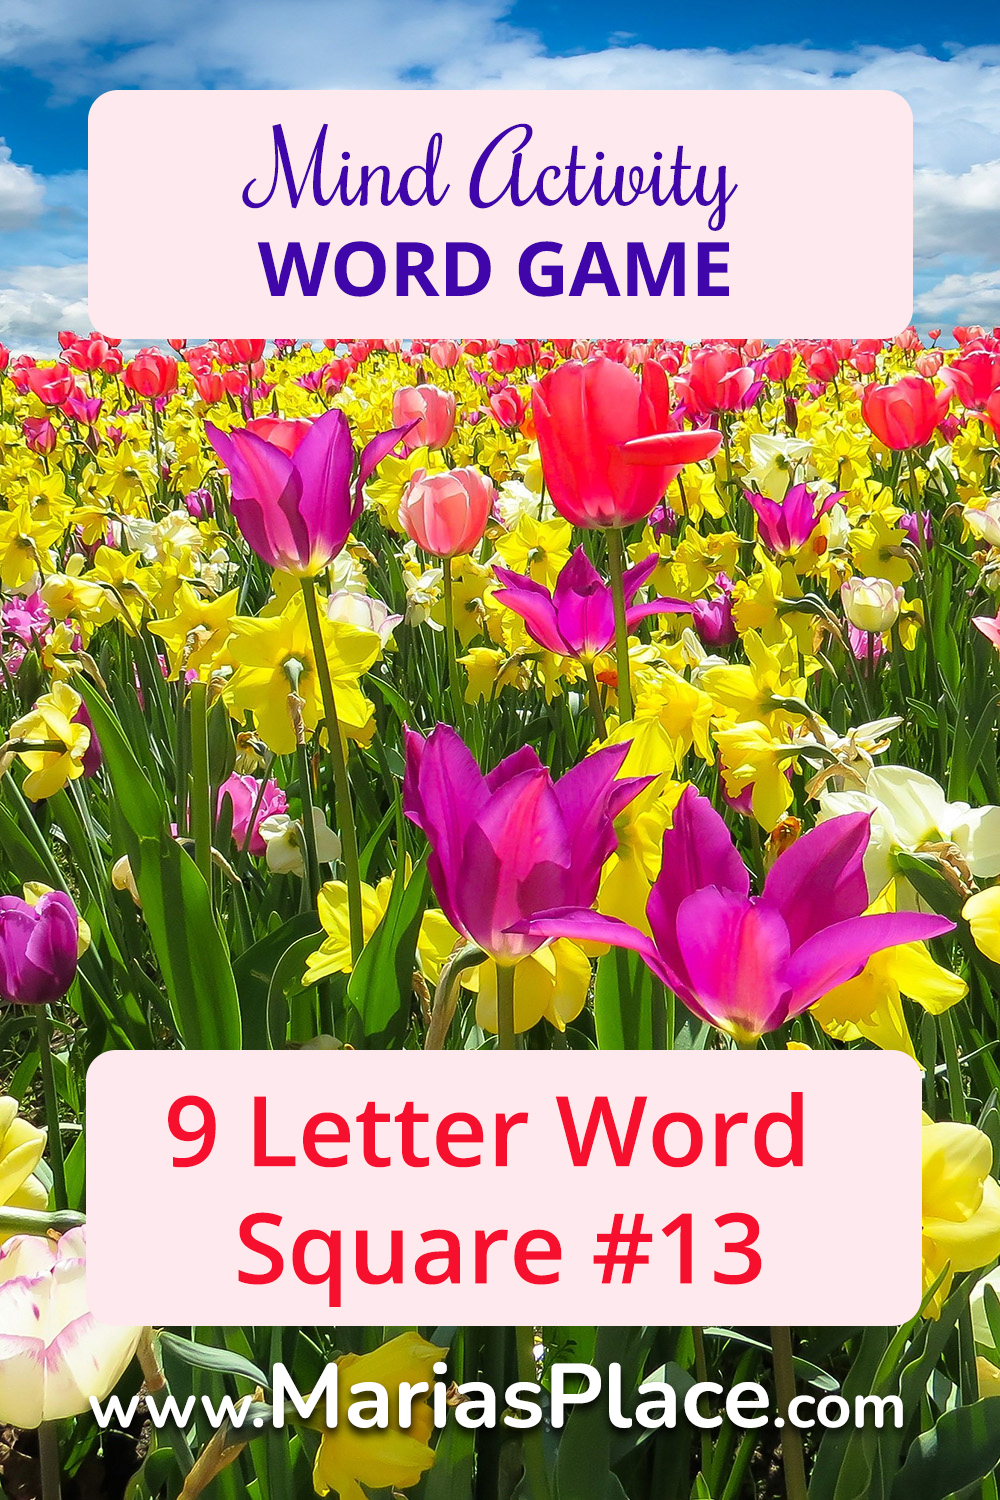 9 Letter Word Square, # 13